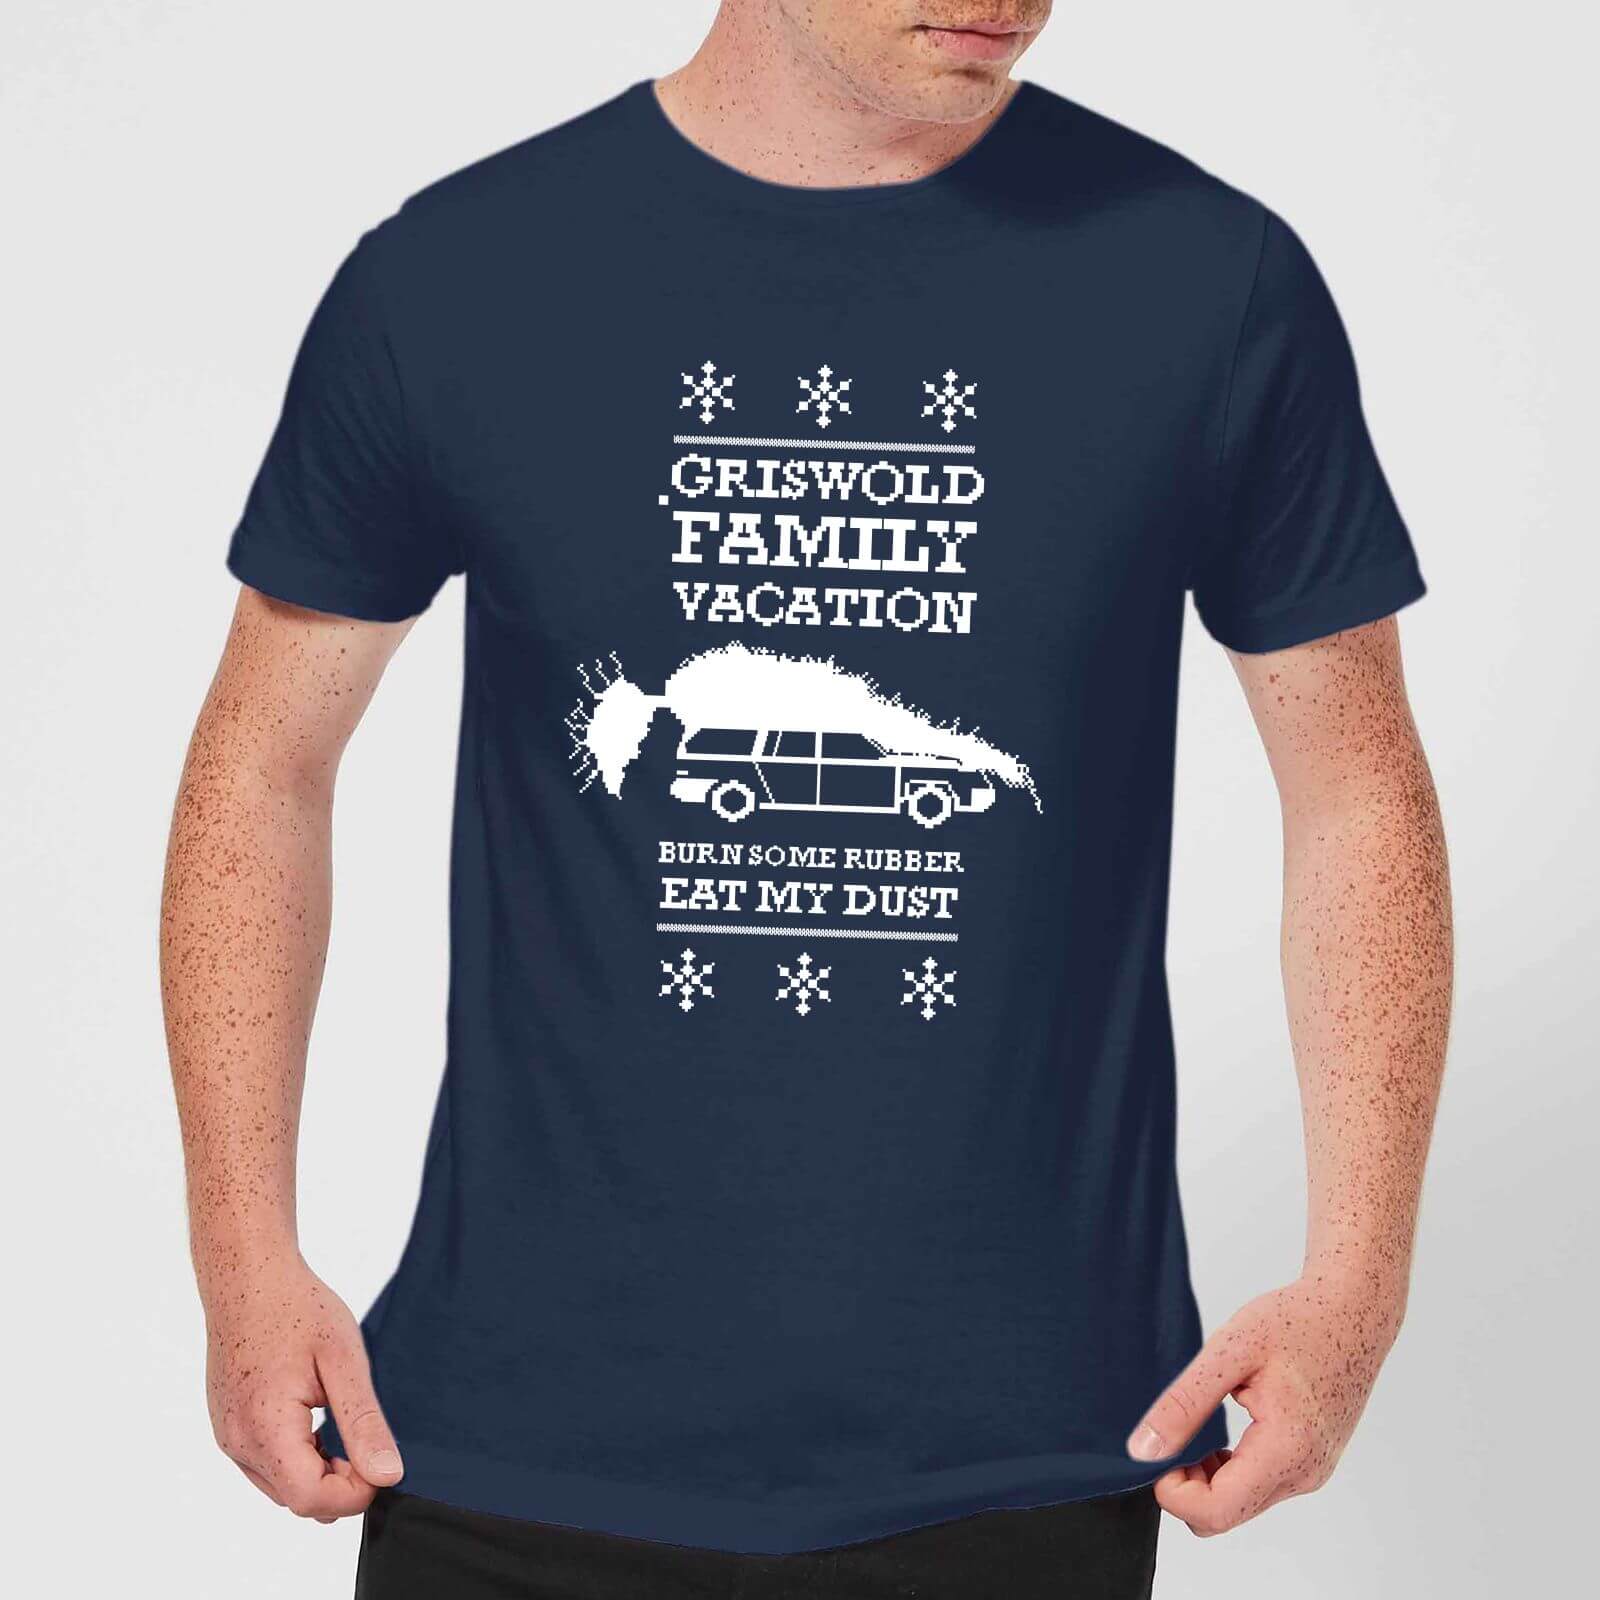 Image of National Lampoon Griswold Vacation Ugly Knit Herren Christmas T-Shirt - Navy Blau - S